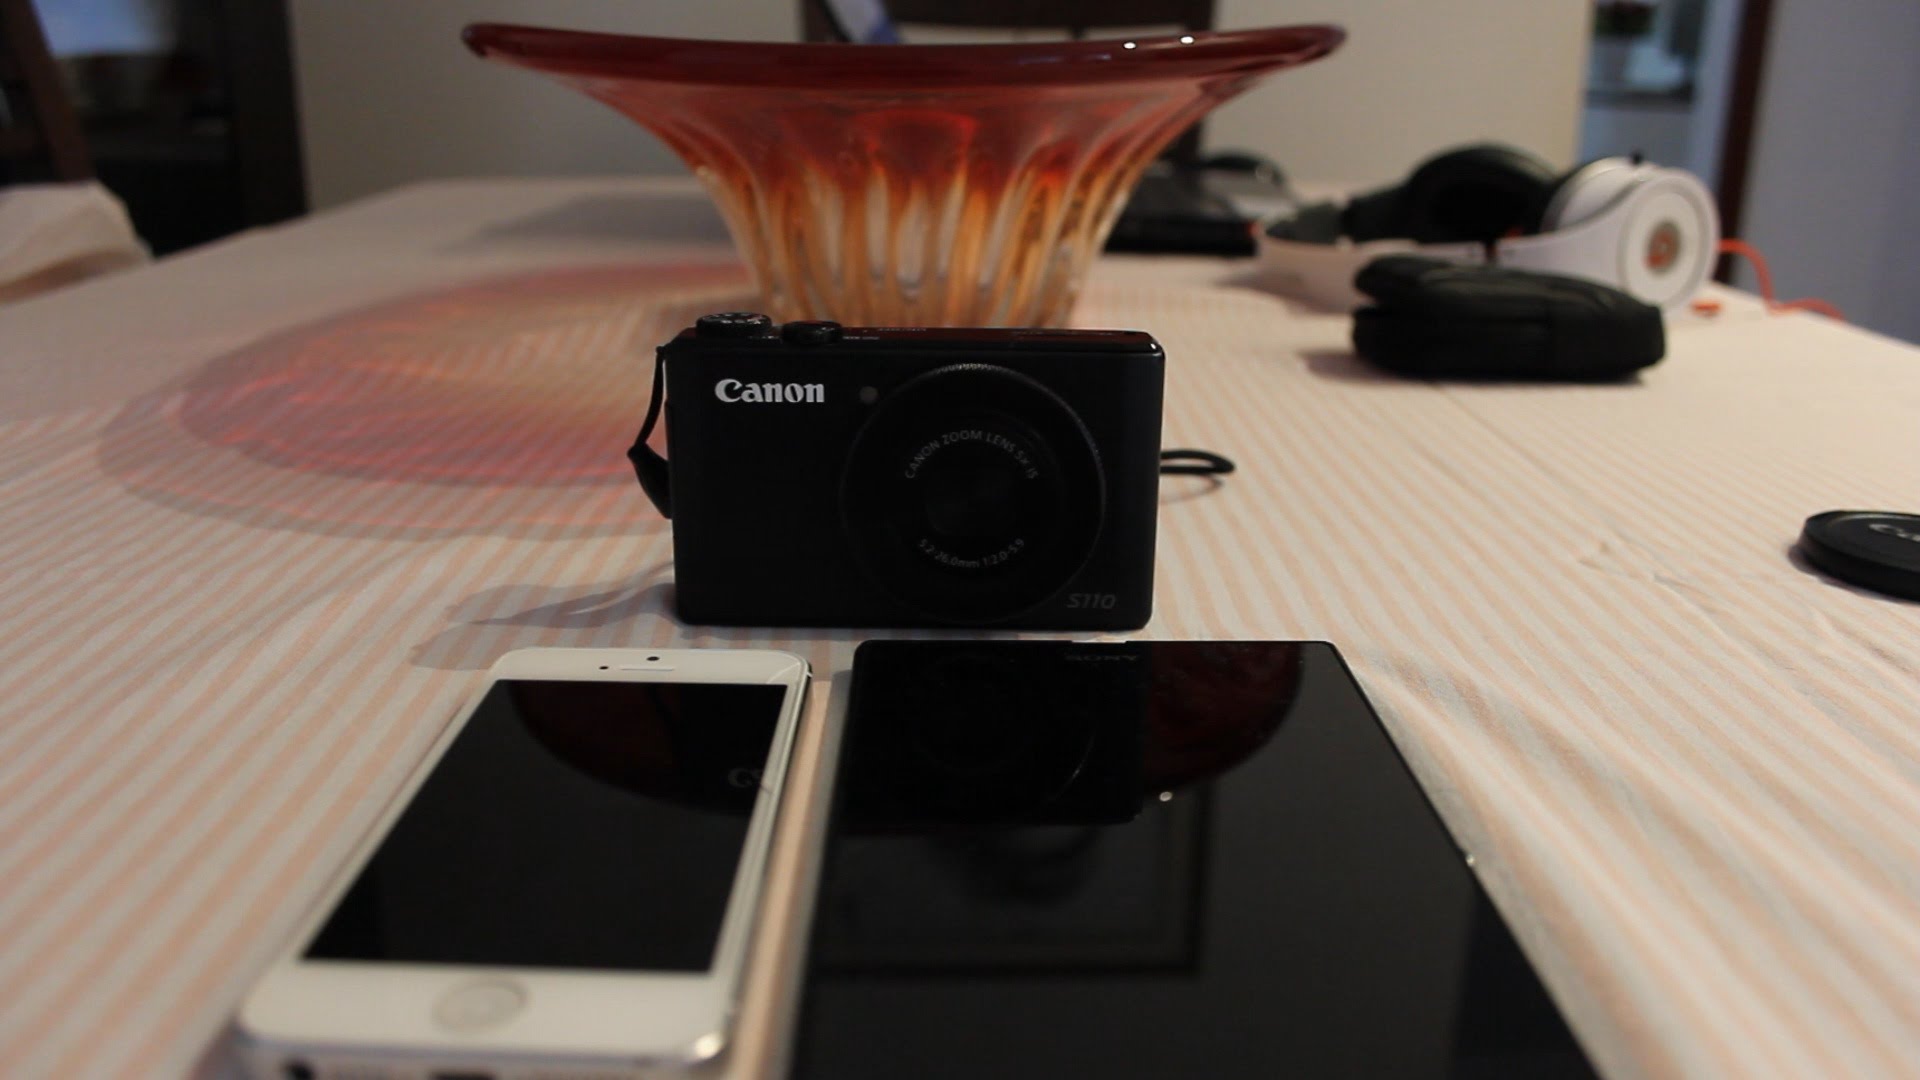 How To Connect Your Canon Camera S110 S120 To Wifi To Download Pictures To Iphone Or Andriod